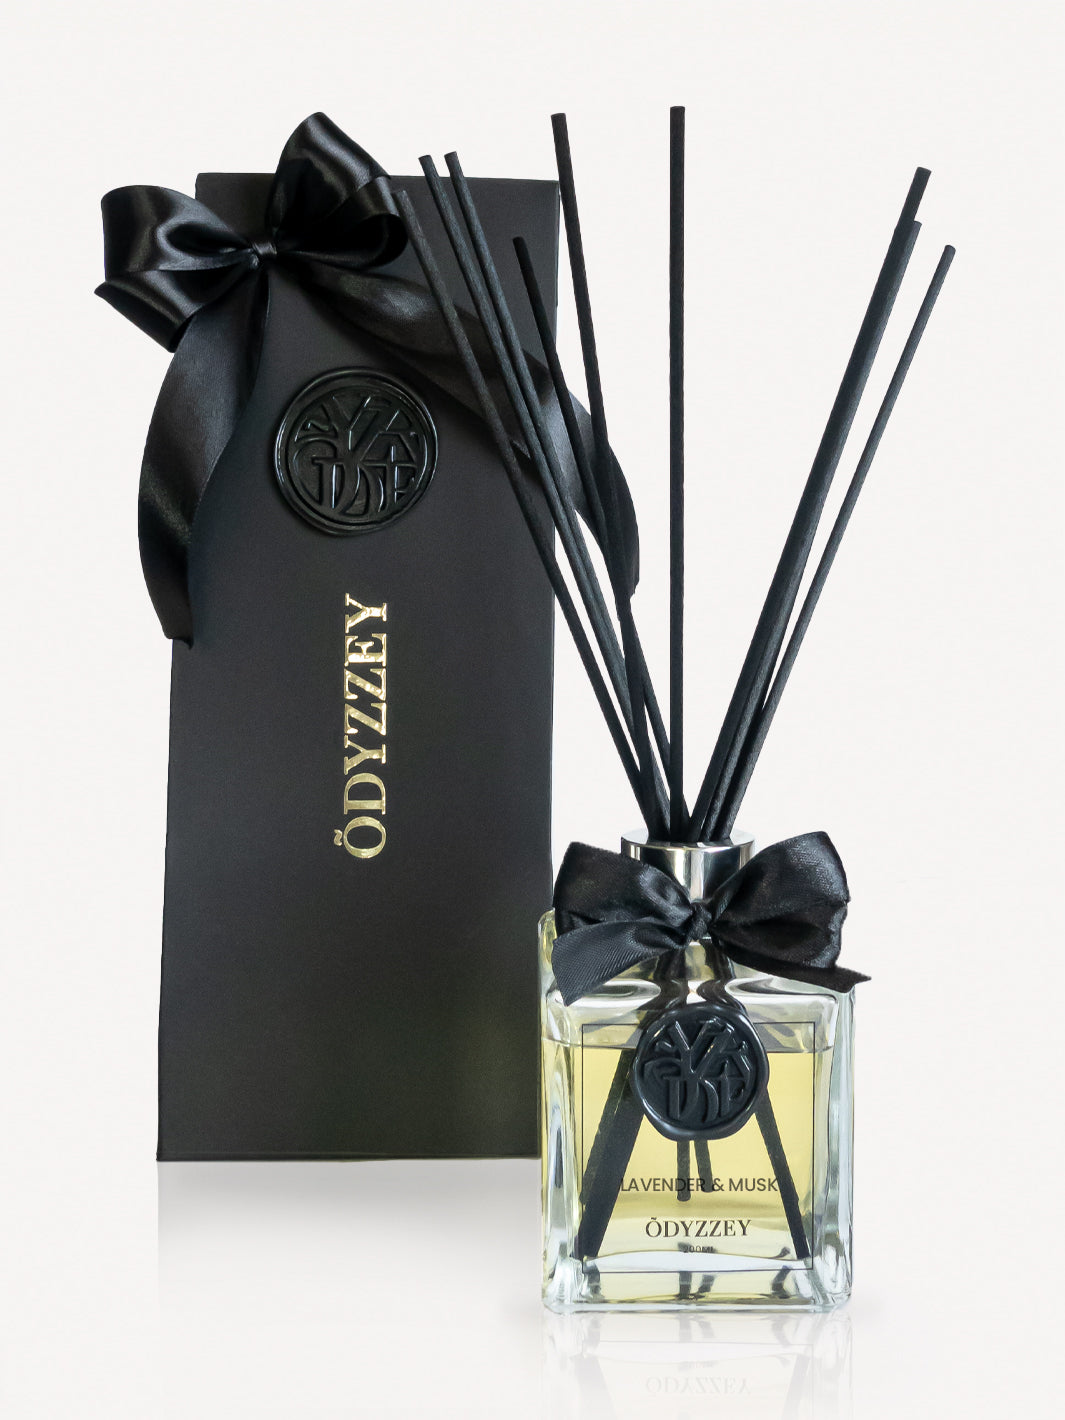 Lavender & Musk Reed Diffuser